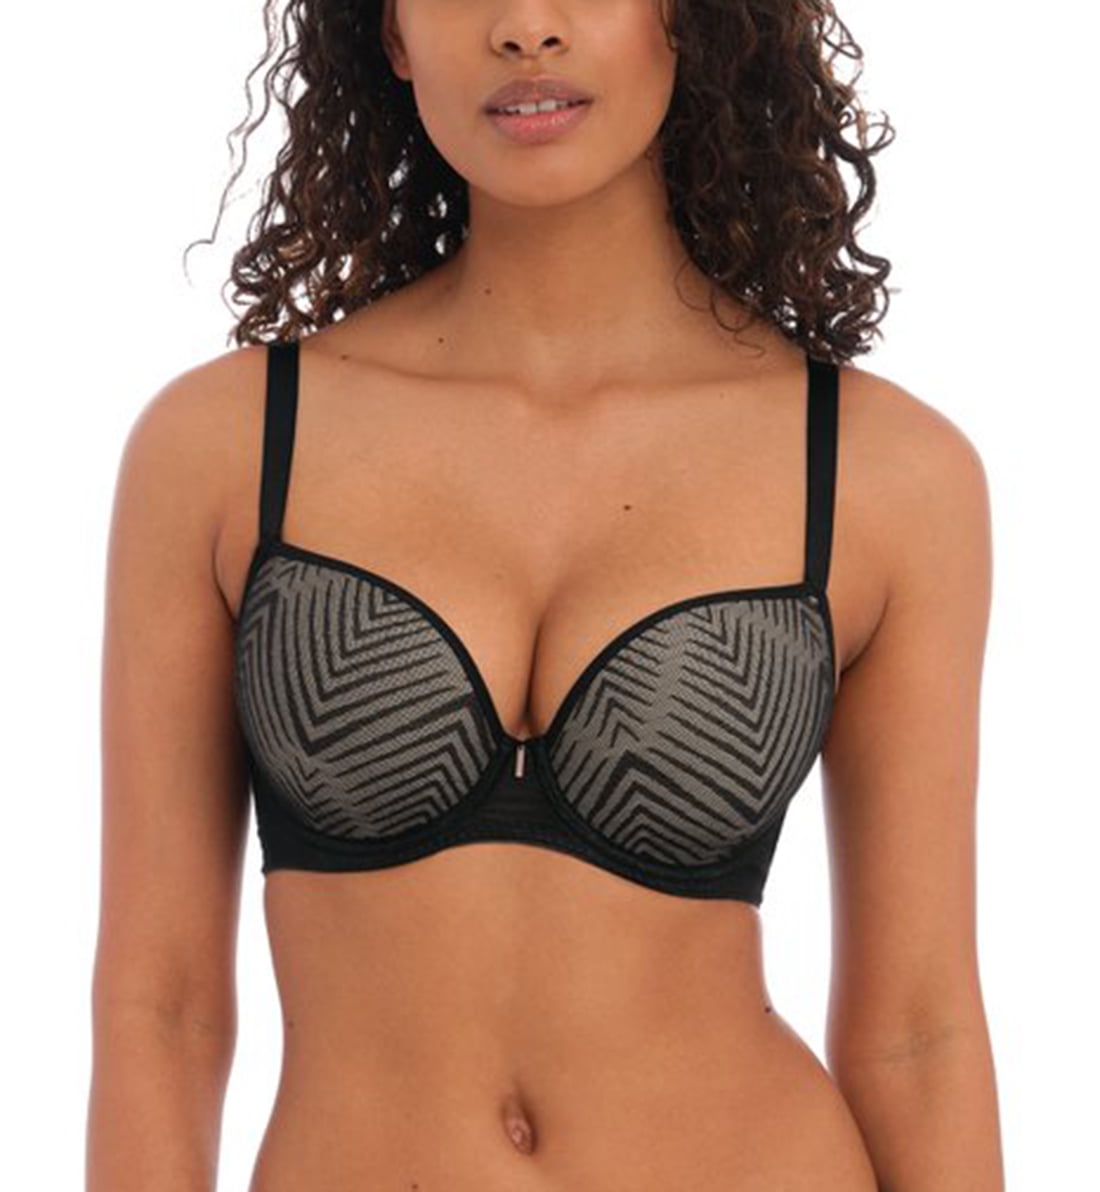 freya patsy half cup 36e top gapes shallow wide root breasts 36E